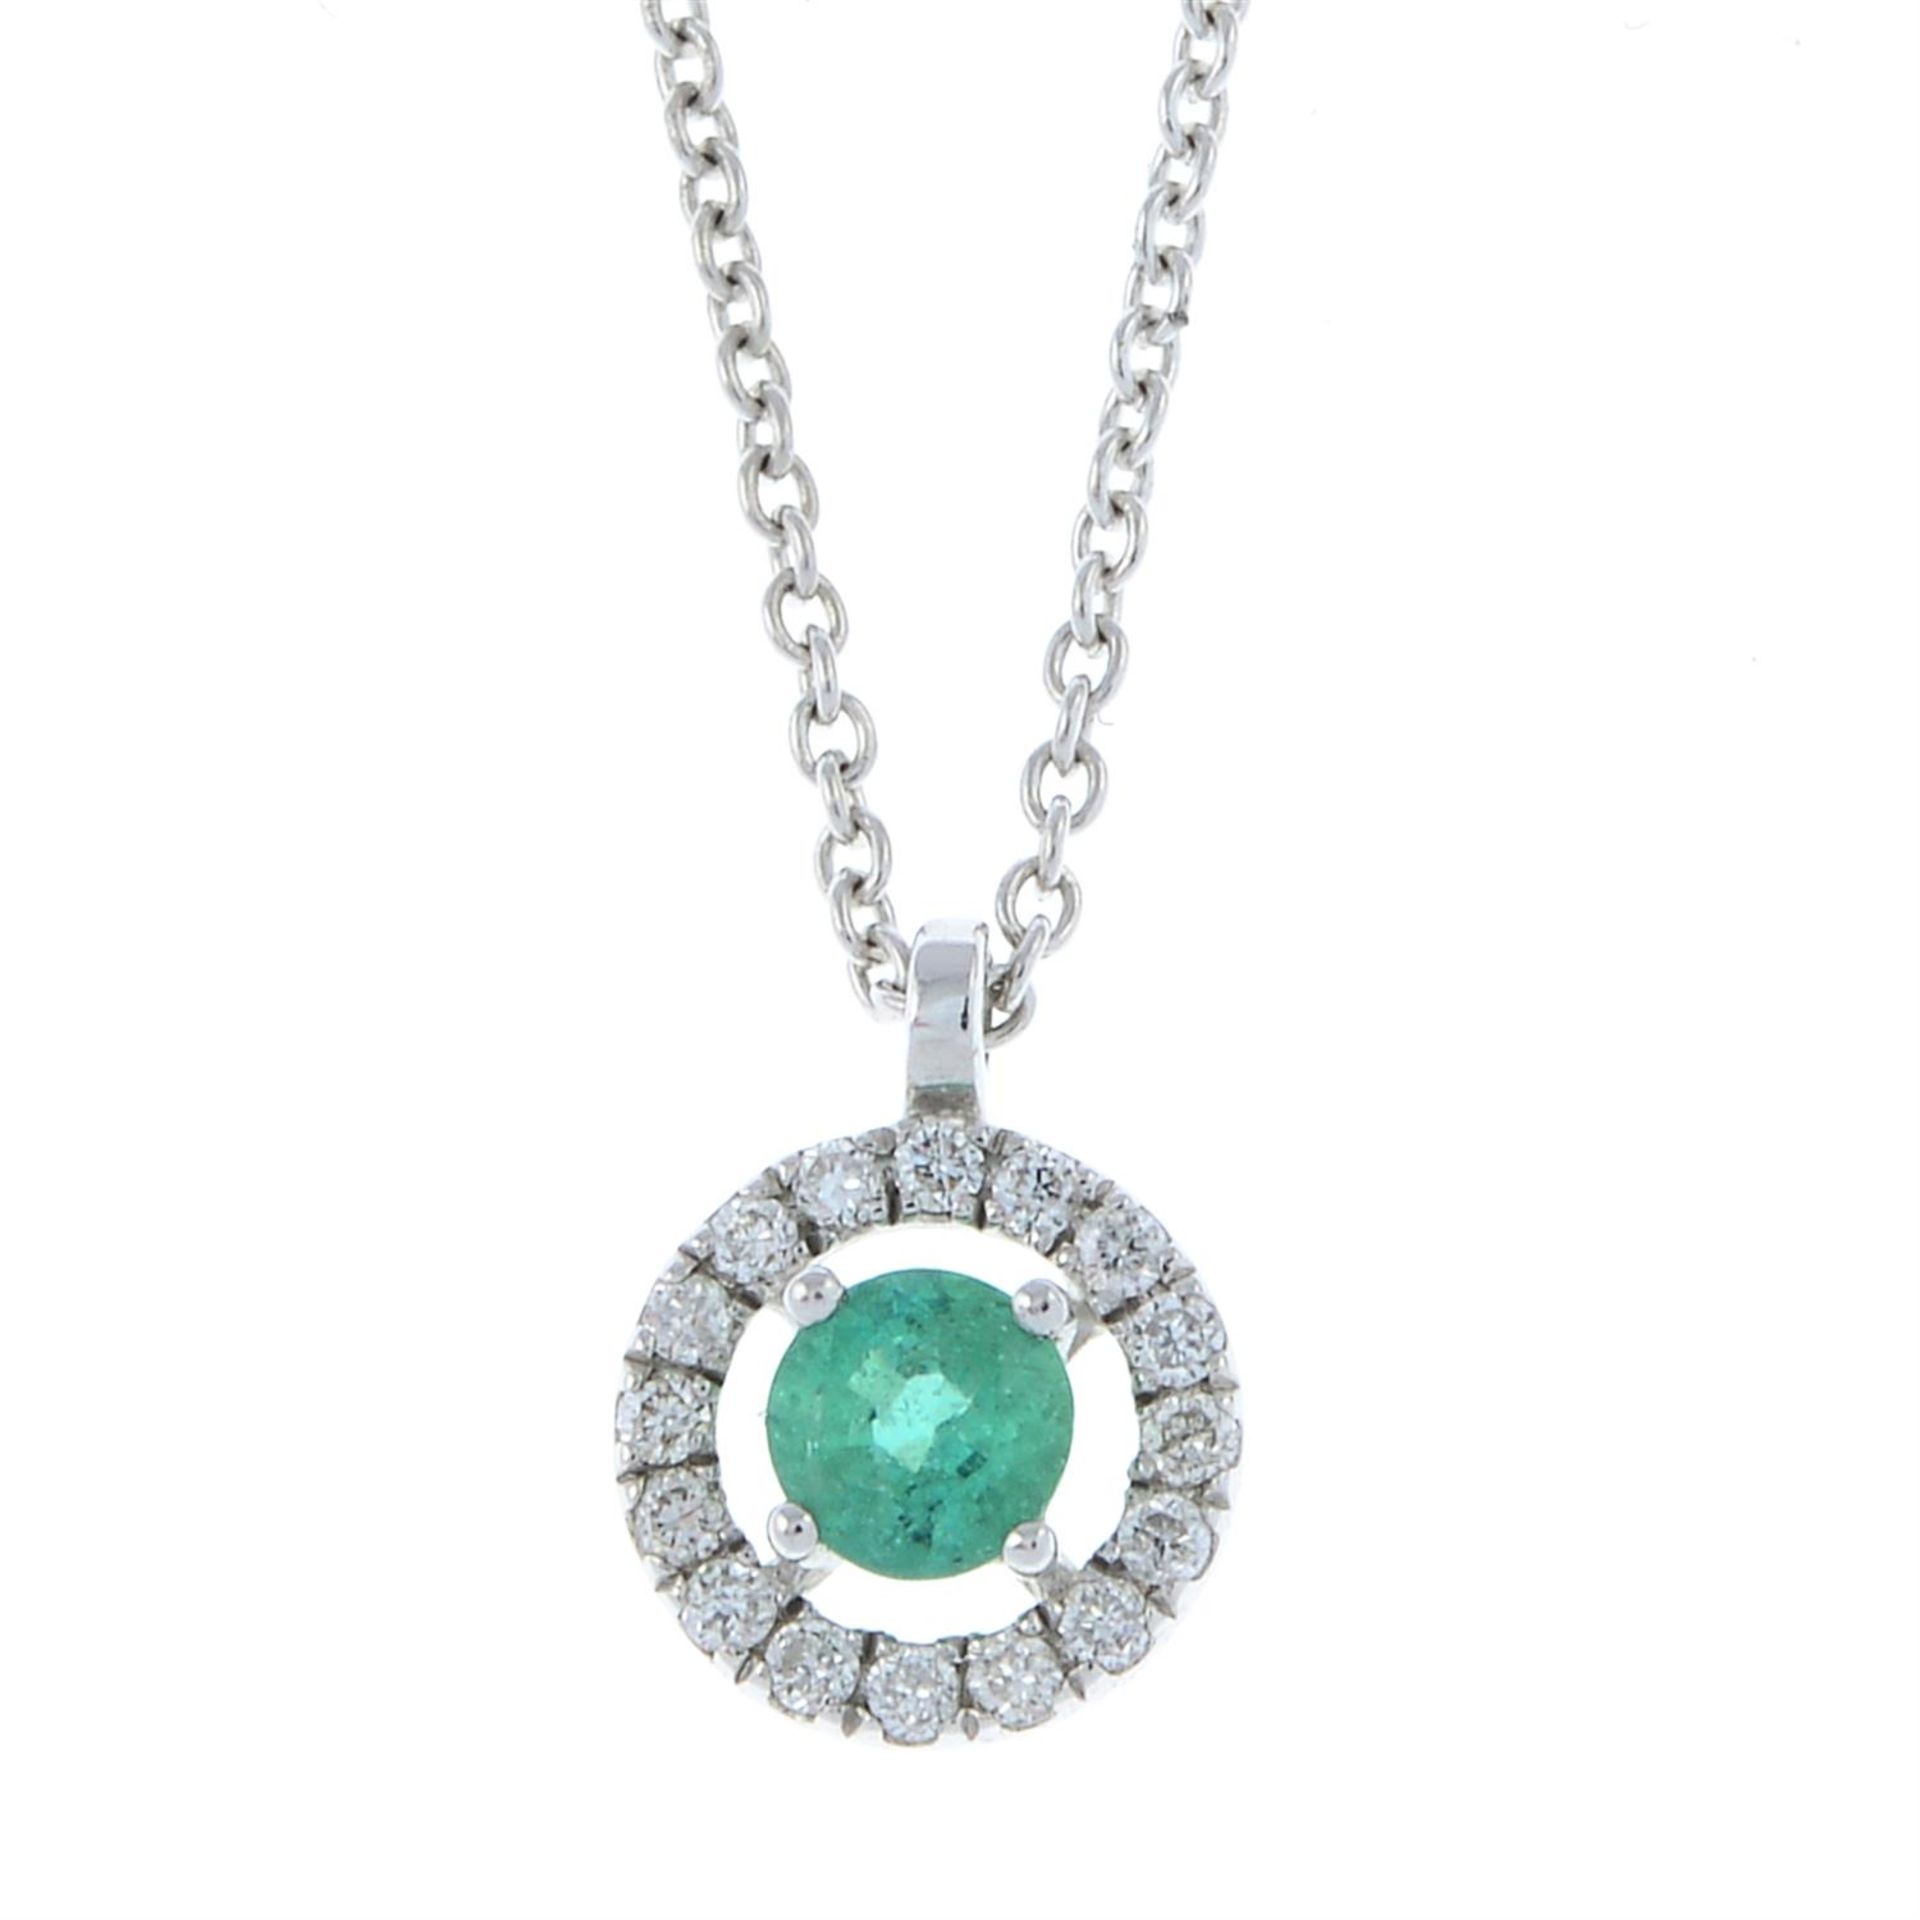 An emerald and diamond pendant, with trace-link chain.